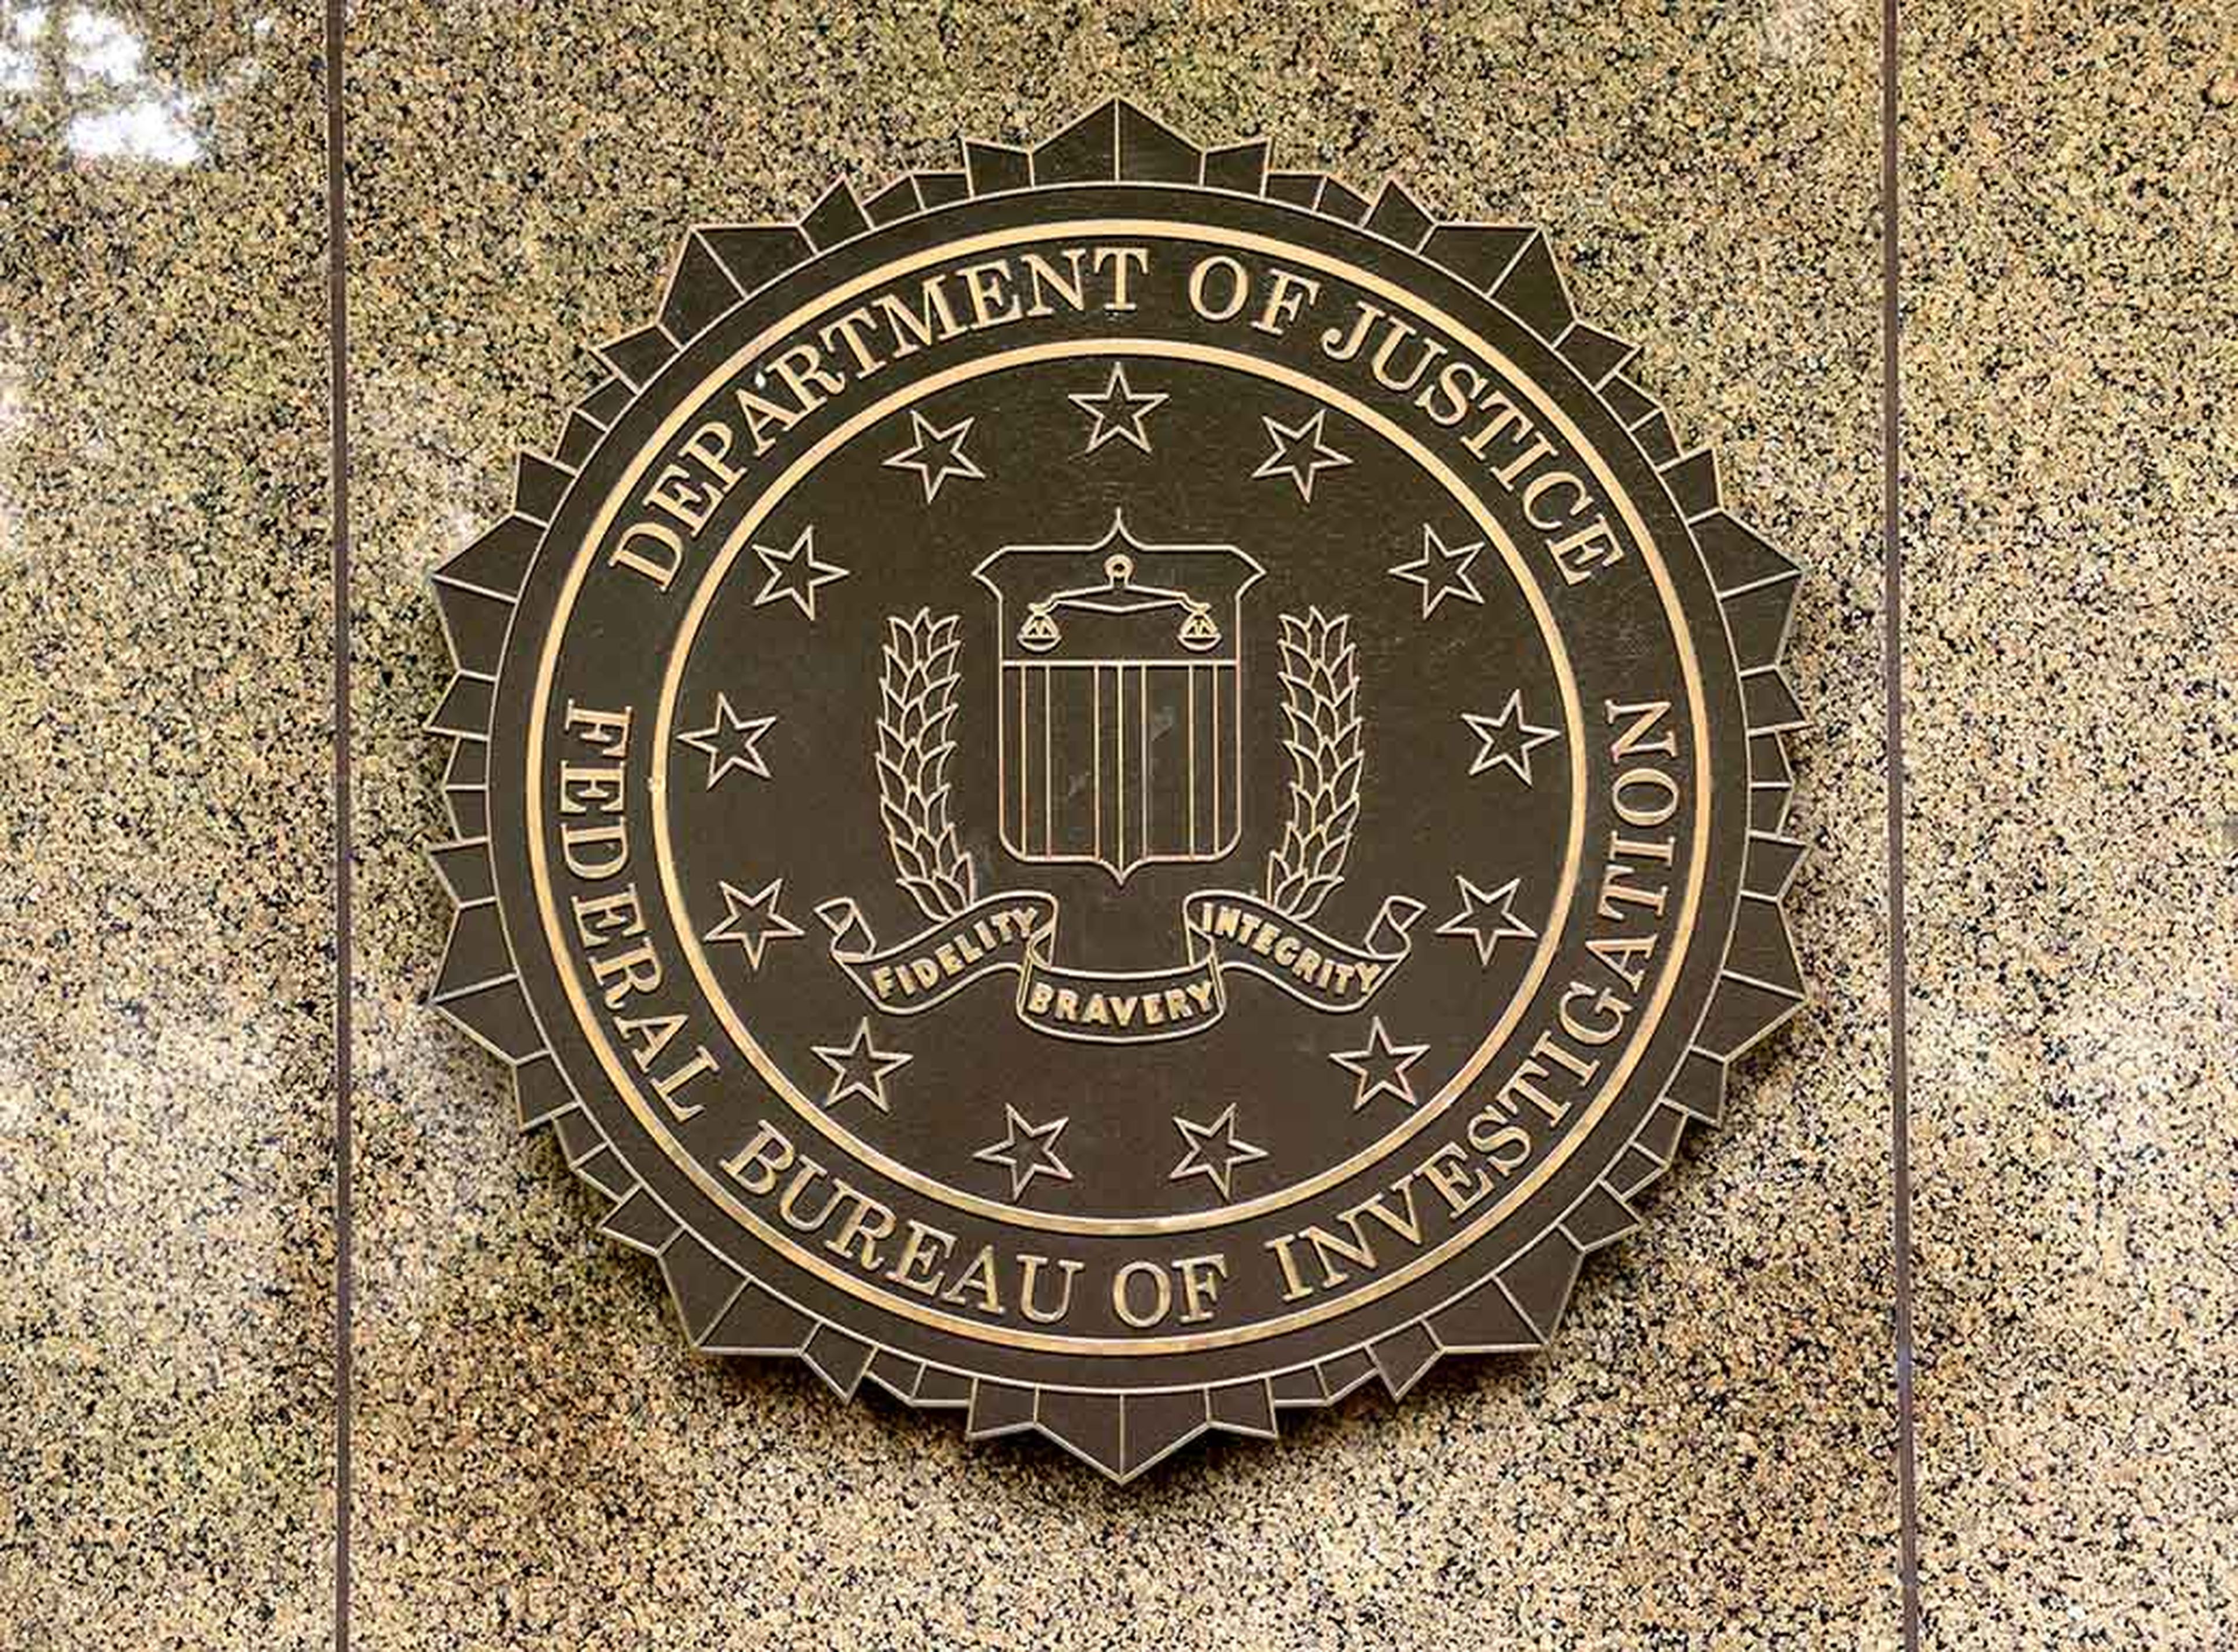 The FBI seal is seen on its headquarters at the J. Edgar Hoover FBI building in Washington.